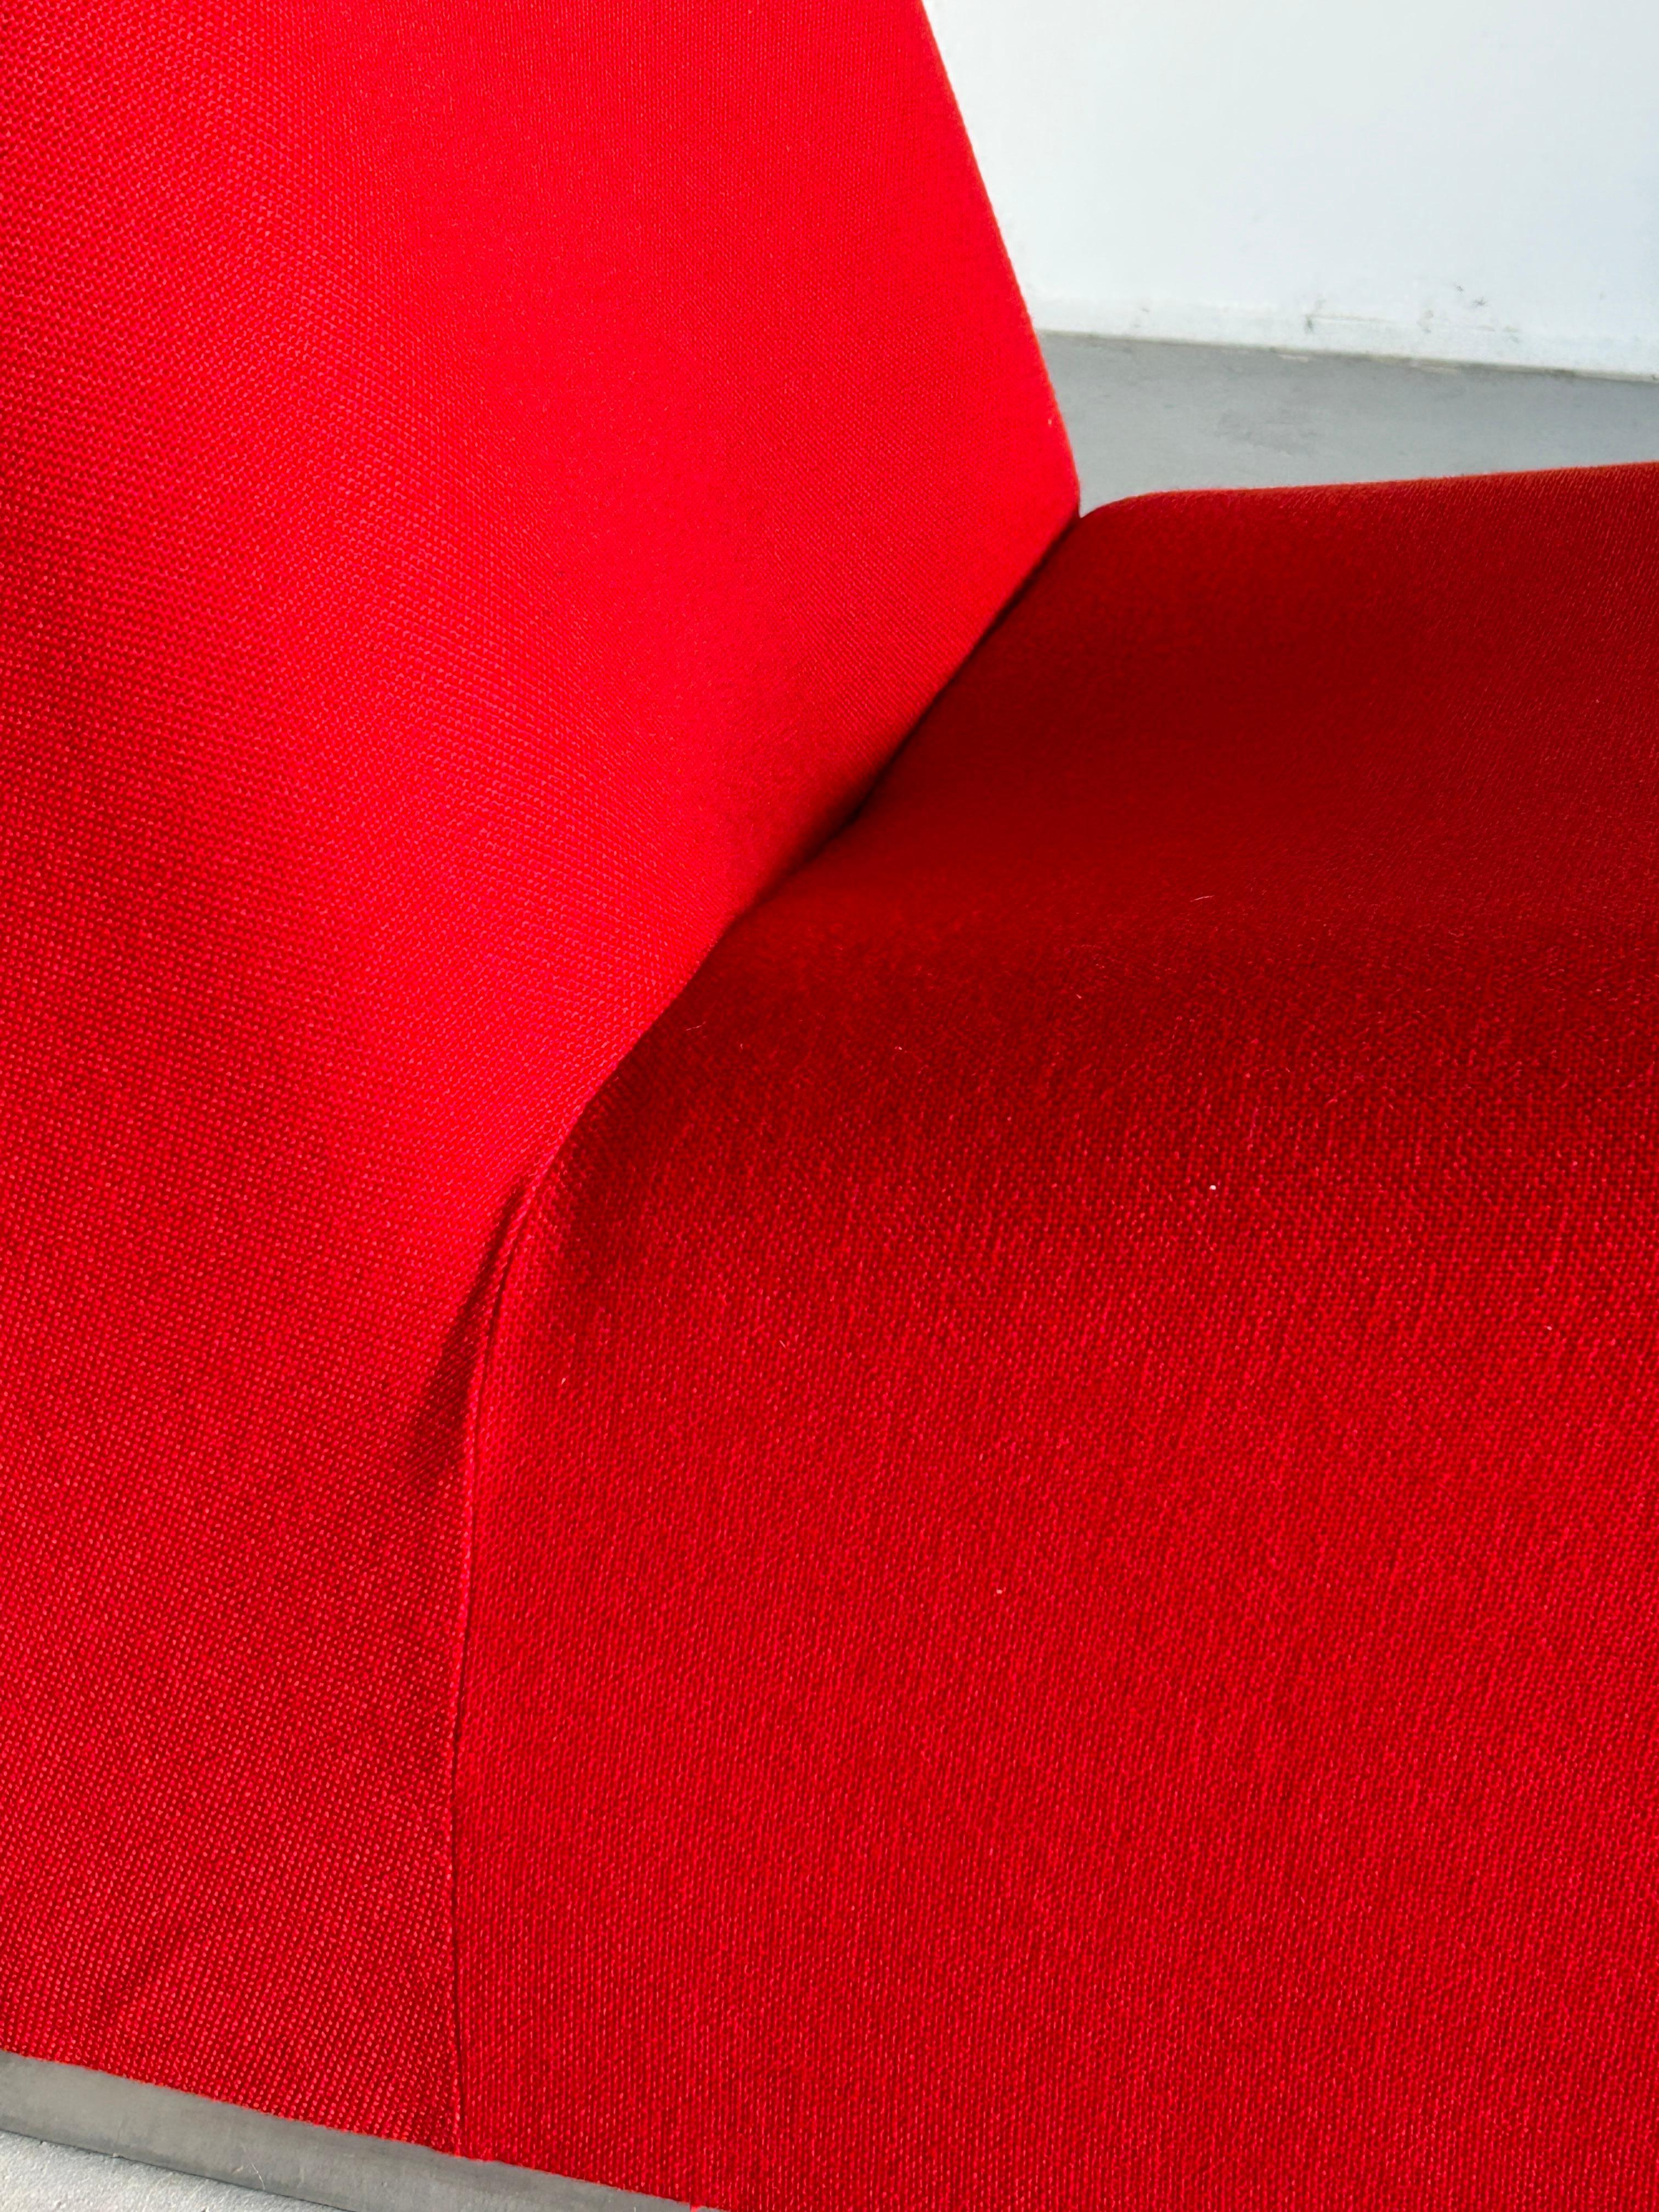 Iconic 'Alky' chair by Giancarlo Piretti for Anonima Castelli, Red Fabric, 1970s 3